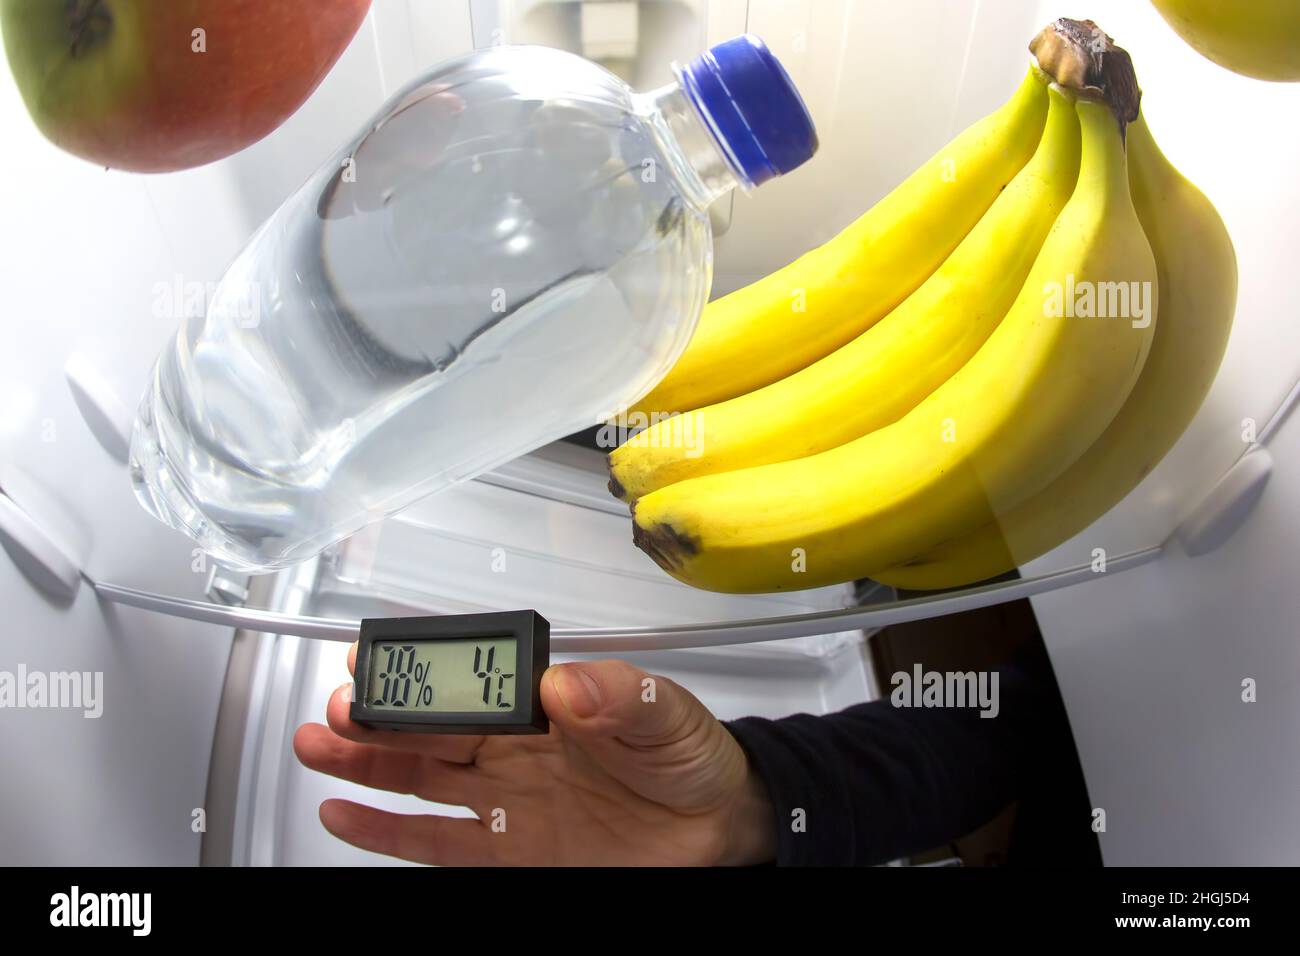 thermometer for measuring the temperature in the refrigerator inside among the products Stock Photo